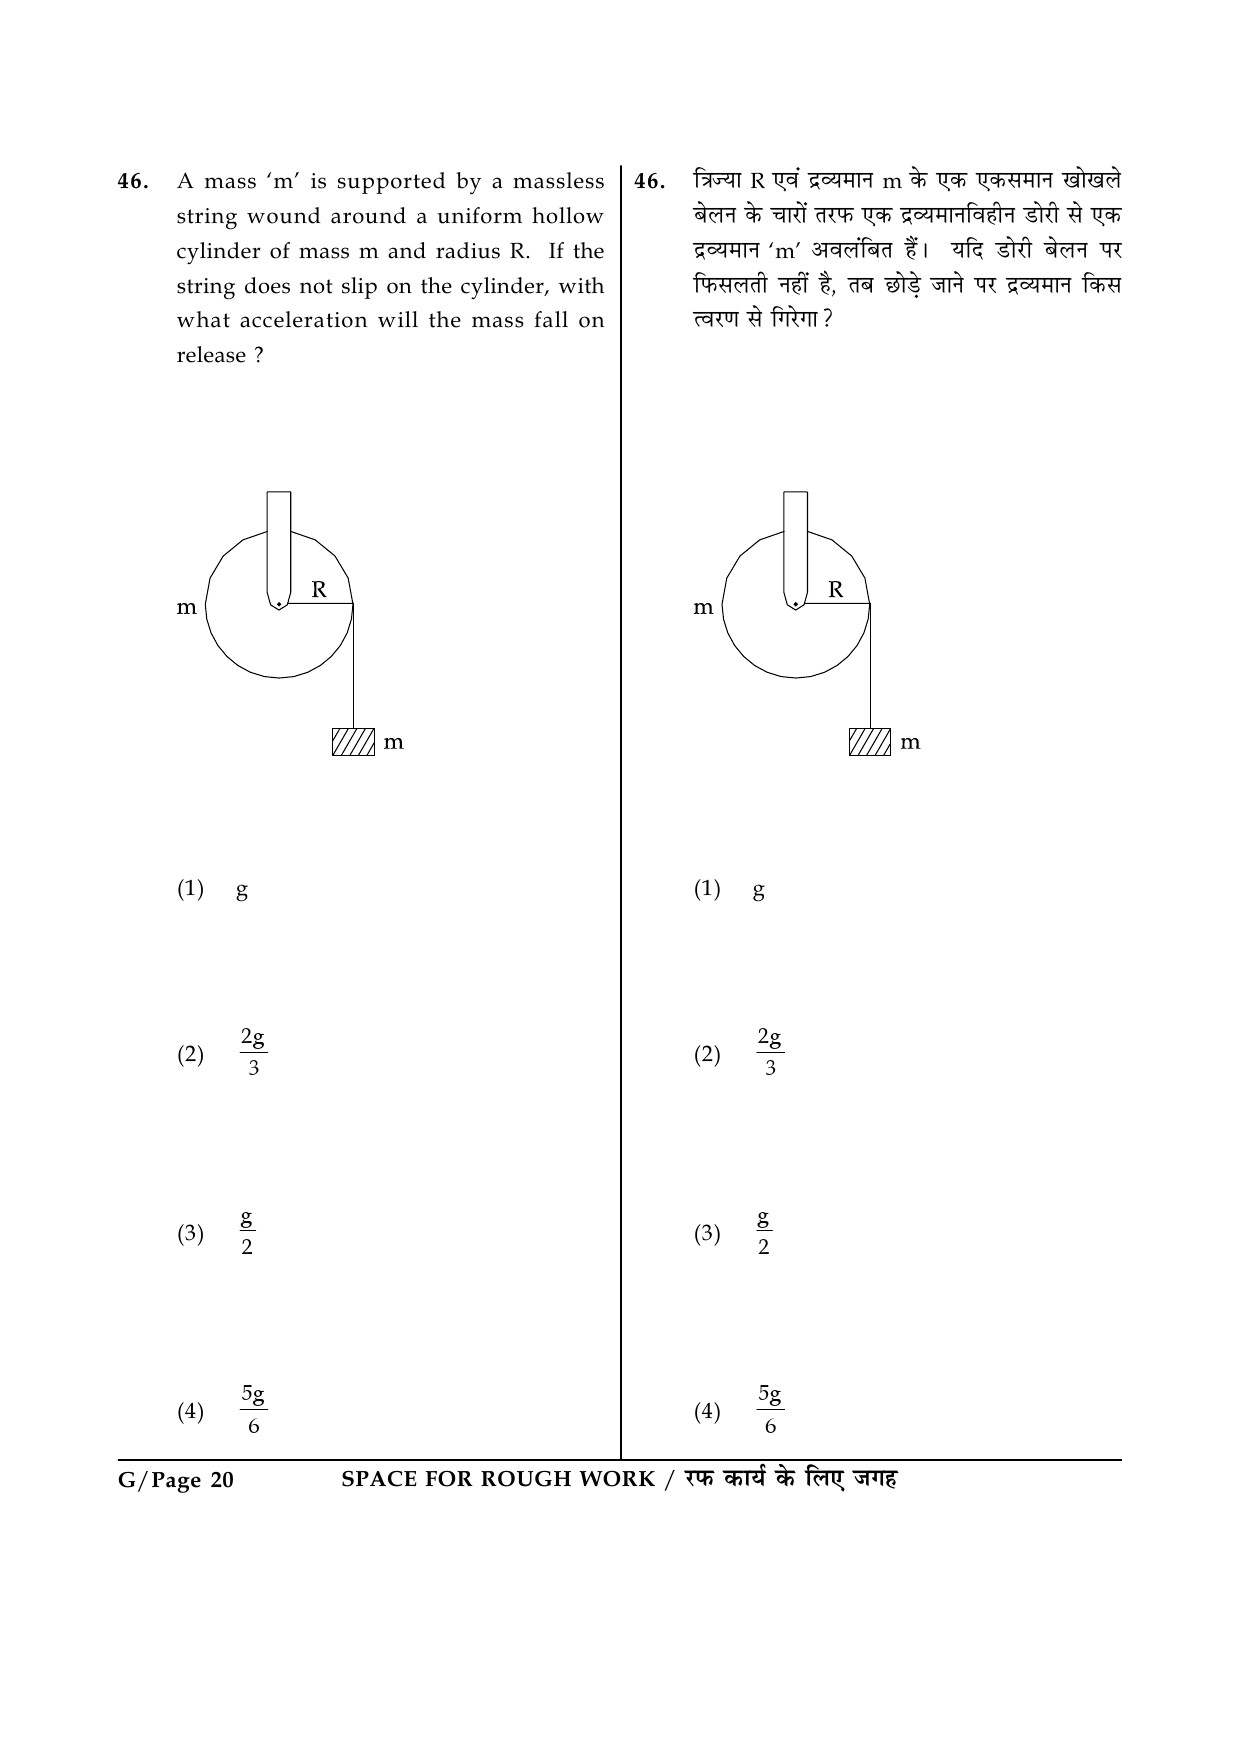 JEE Main Exam Question Paper 2014 Booklet G 20